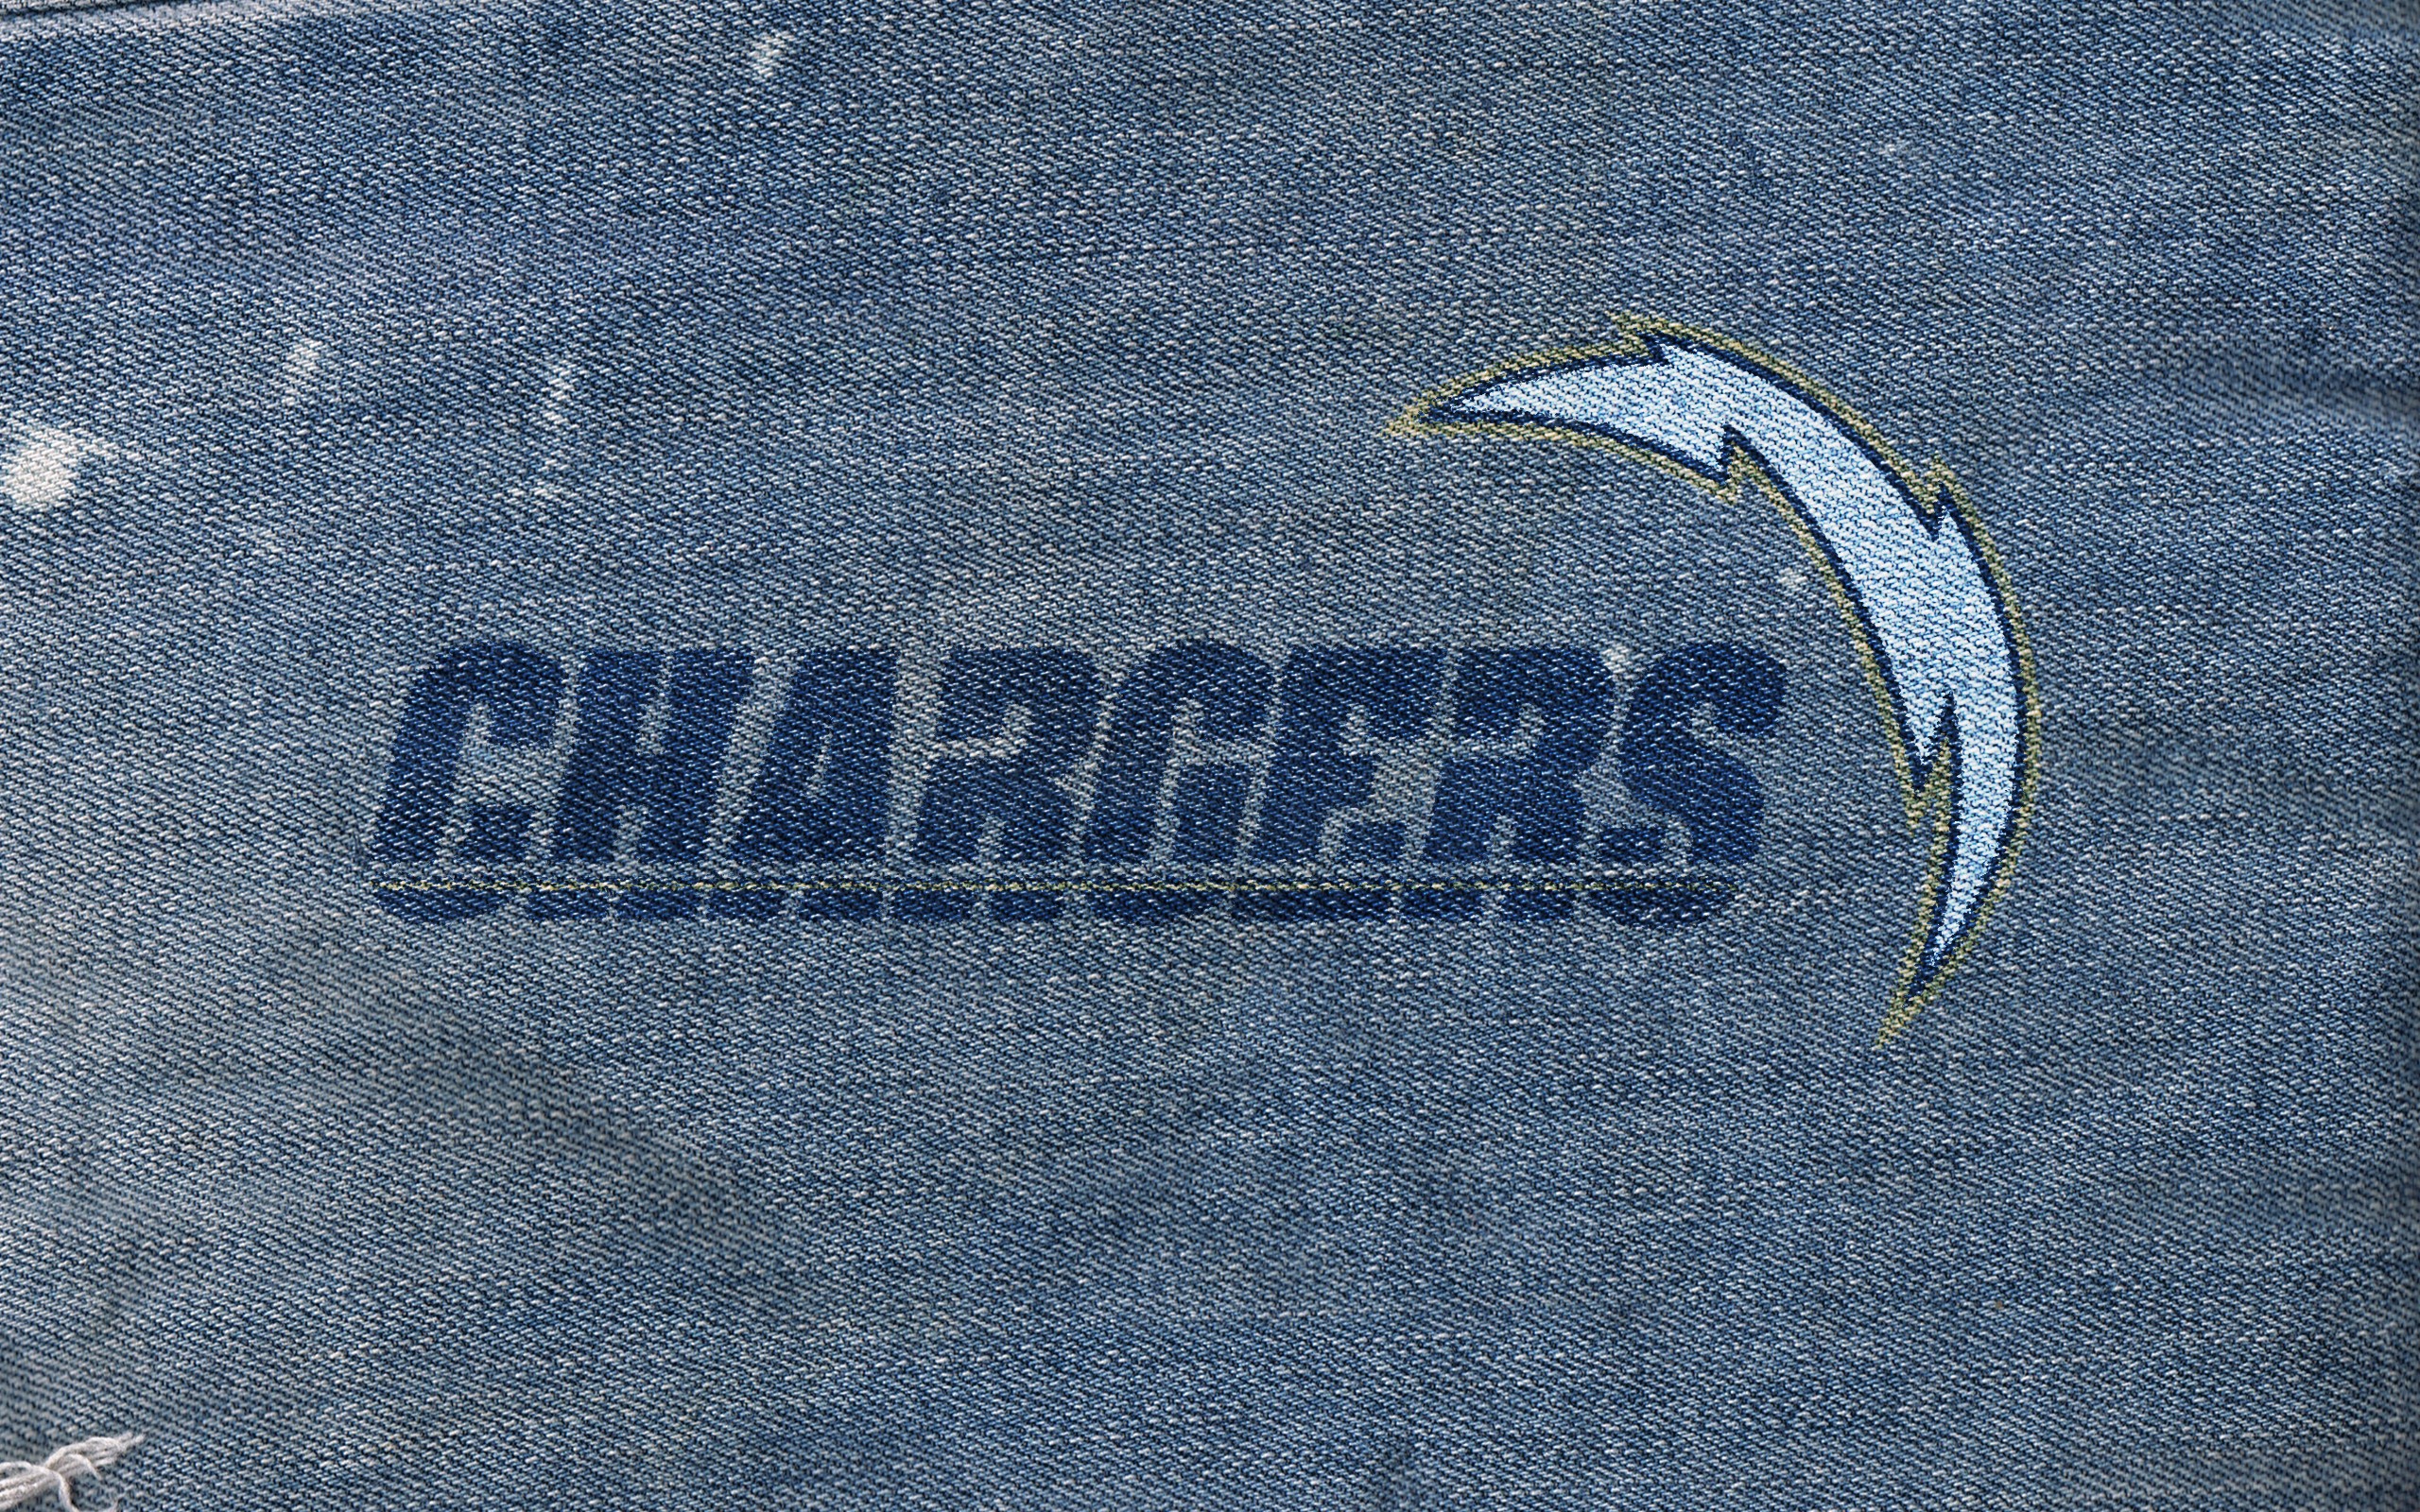 San Diego Chargers Wallpapers Hd Luxury , HD Wallpaper & Backgrounds